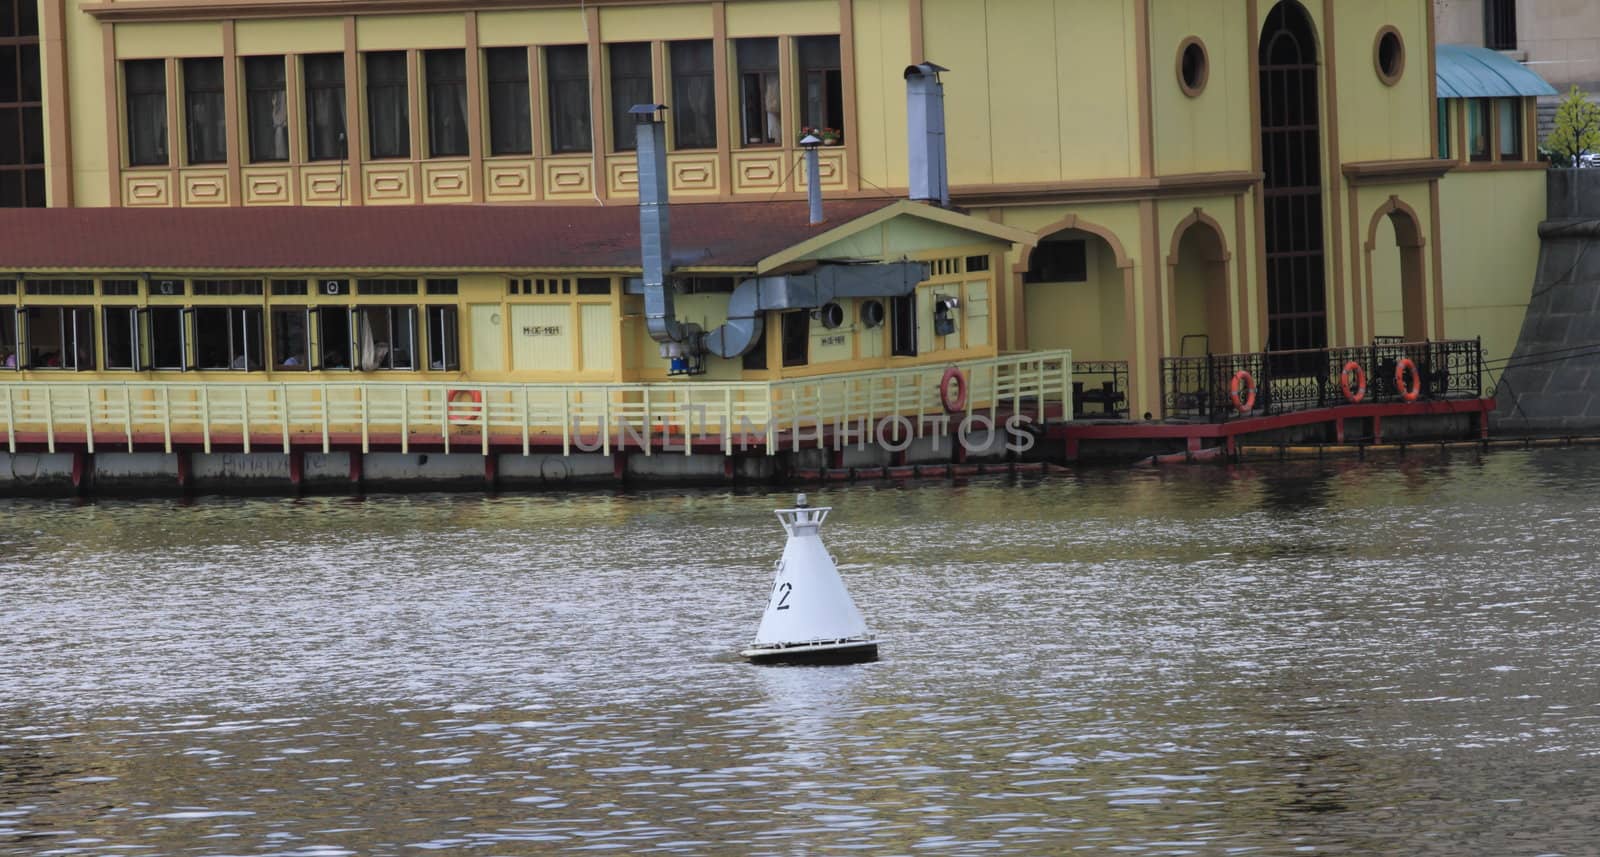 buoy on the river on a gray background waves. In the background, building on the banks of yellow with a brown roof